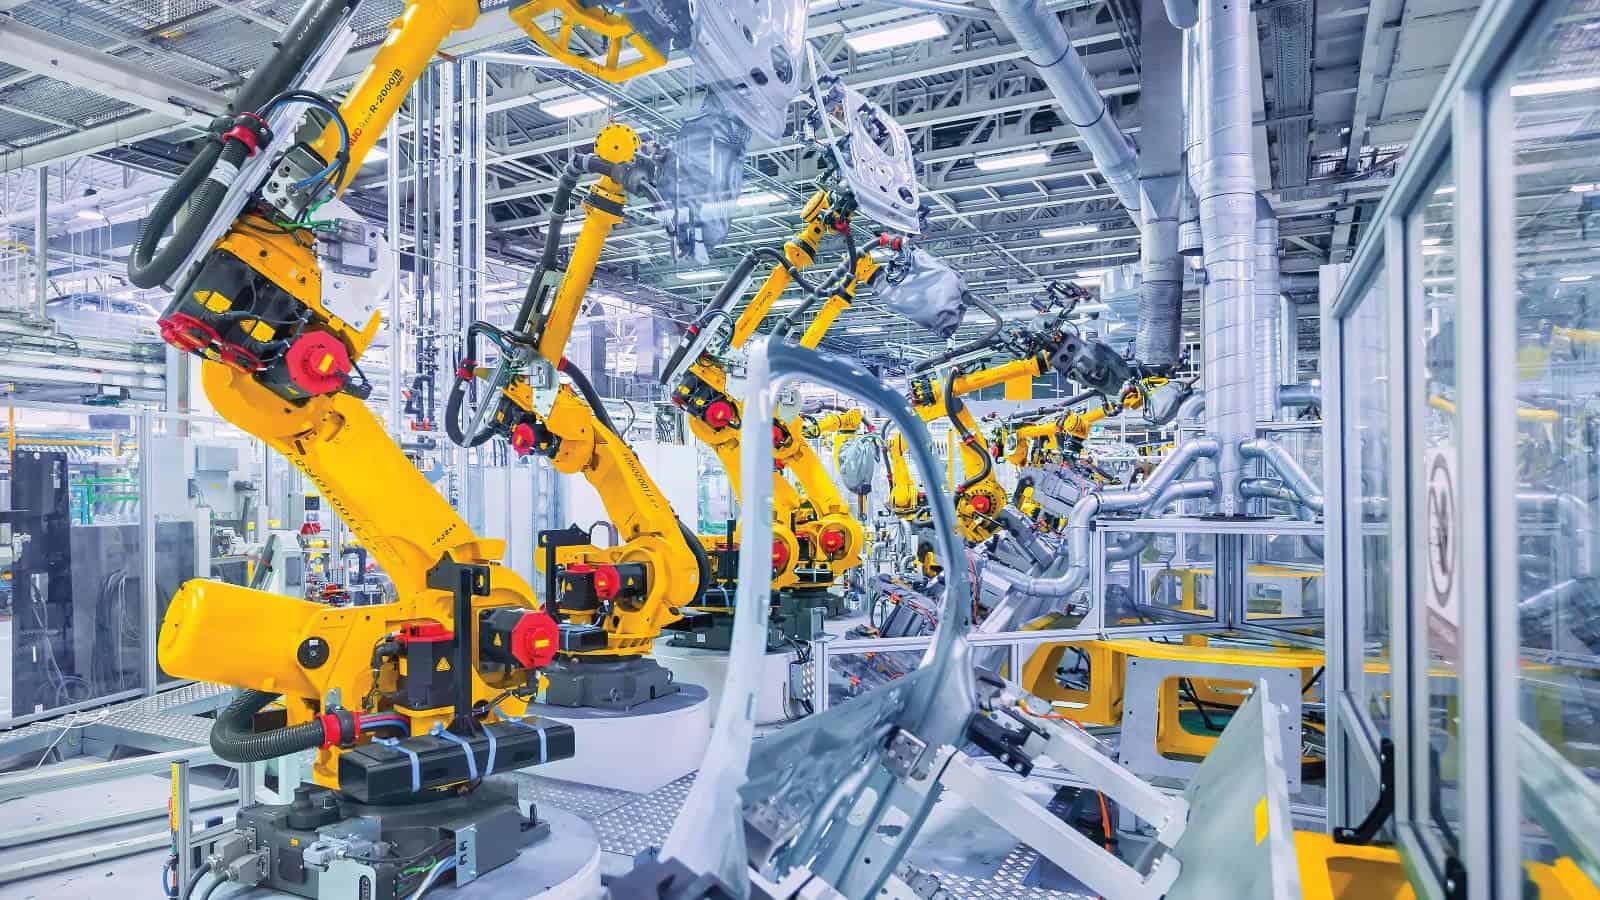 Corvalent Industrial Automation – Micro factories Swiftly Move to Automation for More Resilient Manufacturing